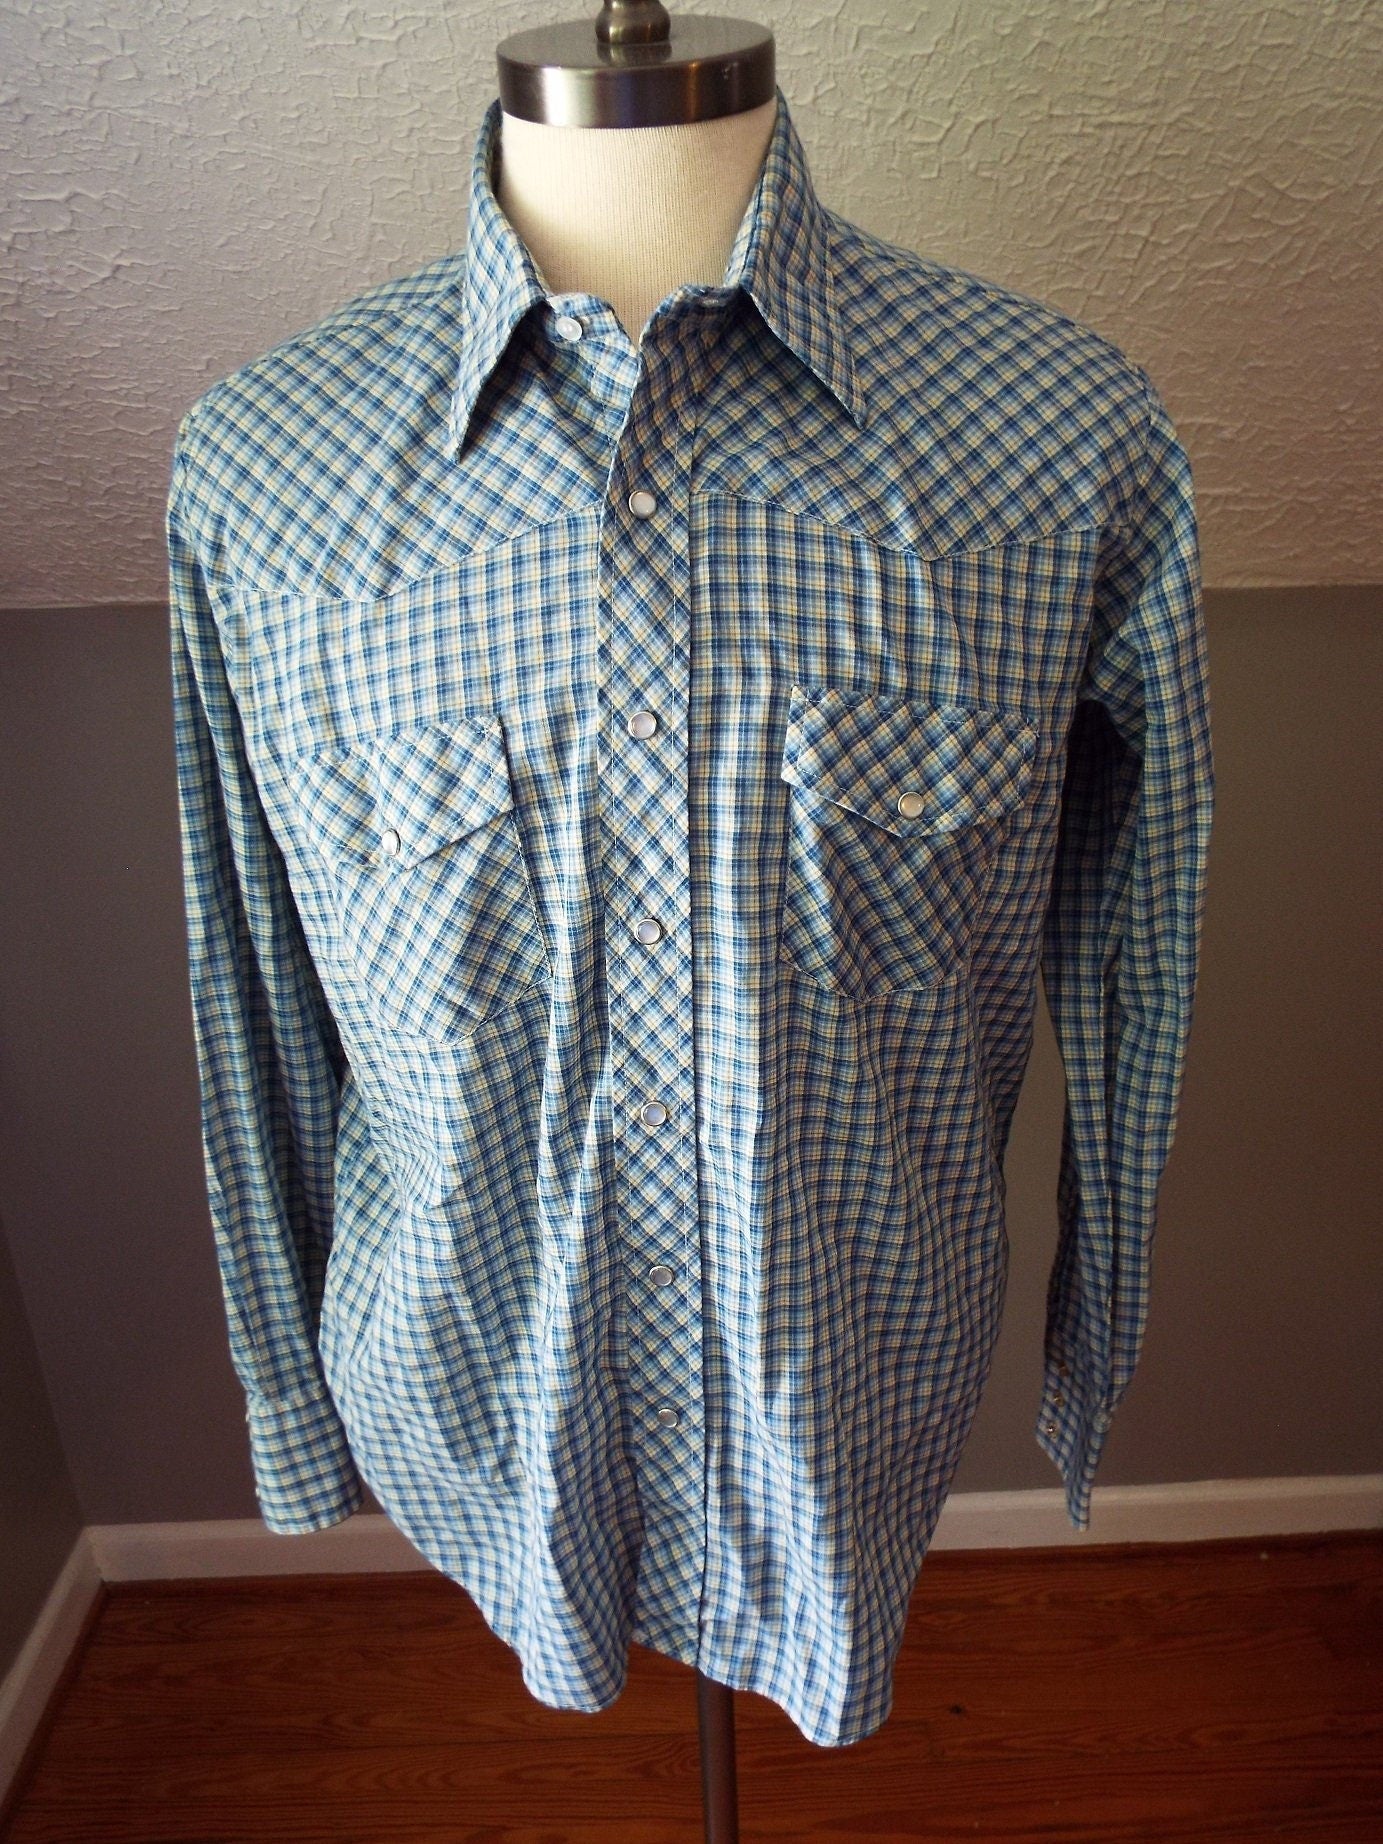 Vintage Long Sleeve Button Down Plaid Western Snap Shirt by Country Touch Sportswear